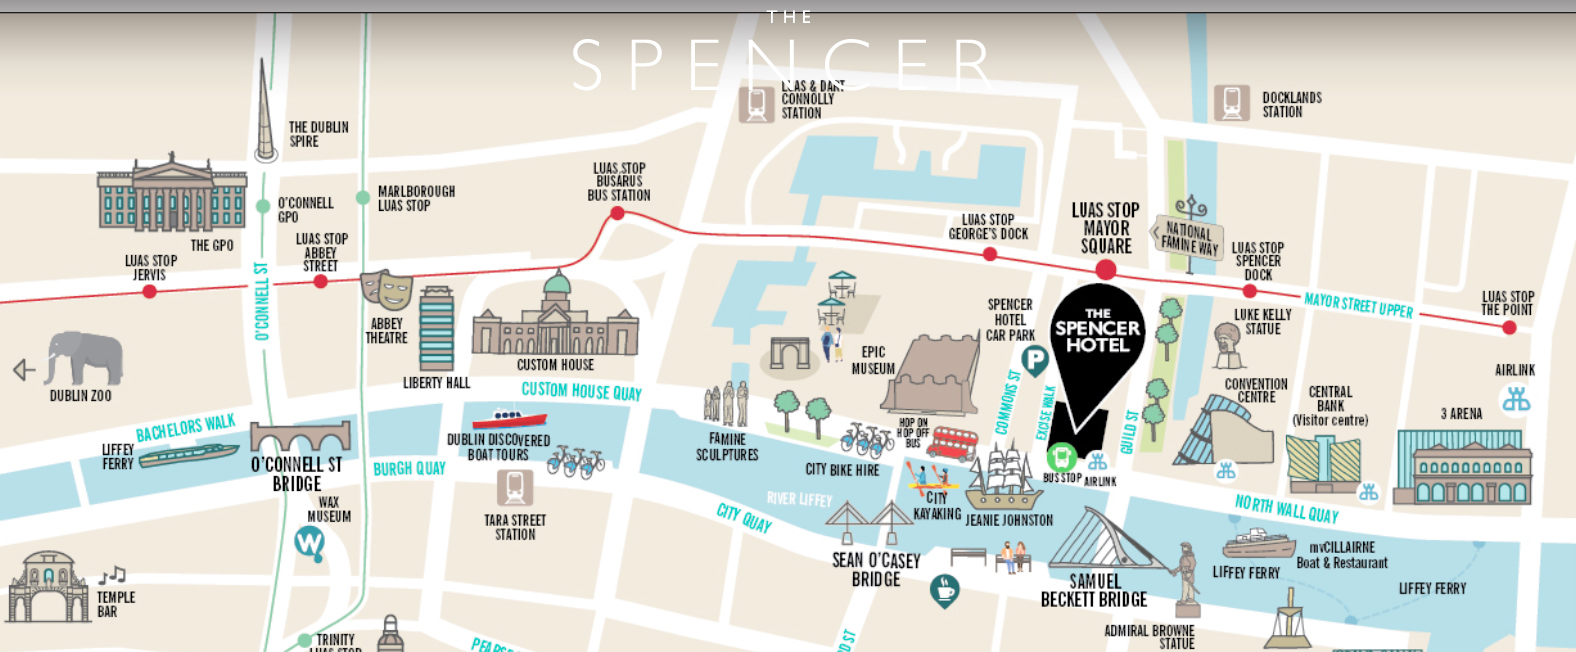 The Spencer Hotel Map